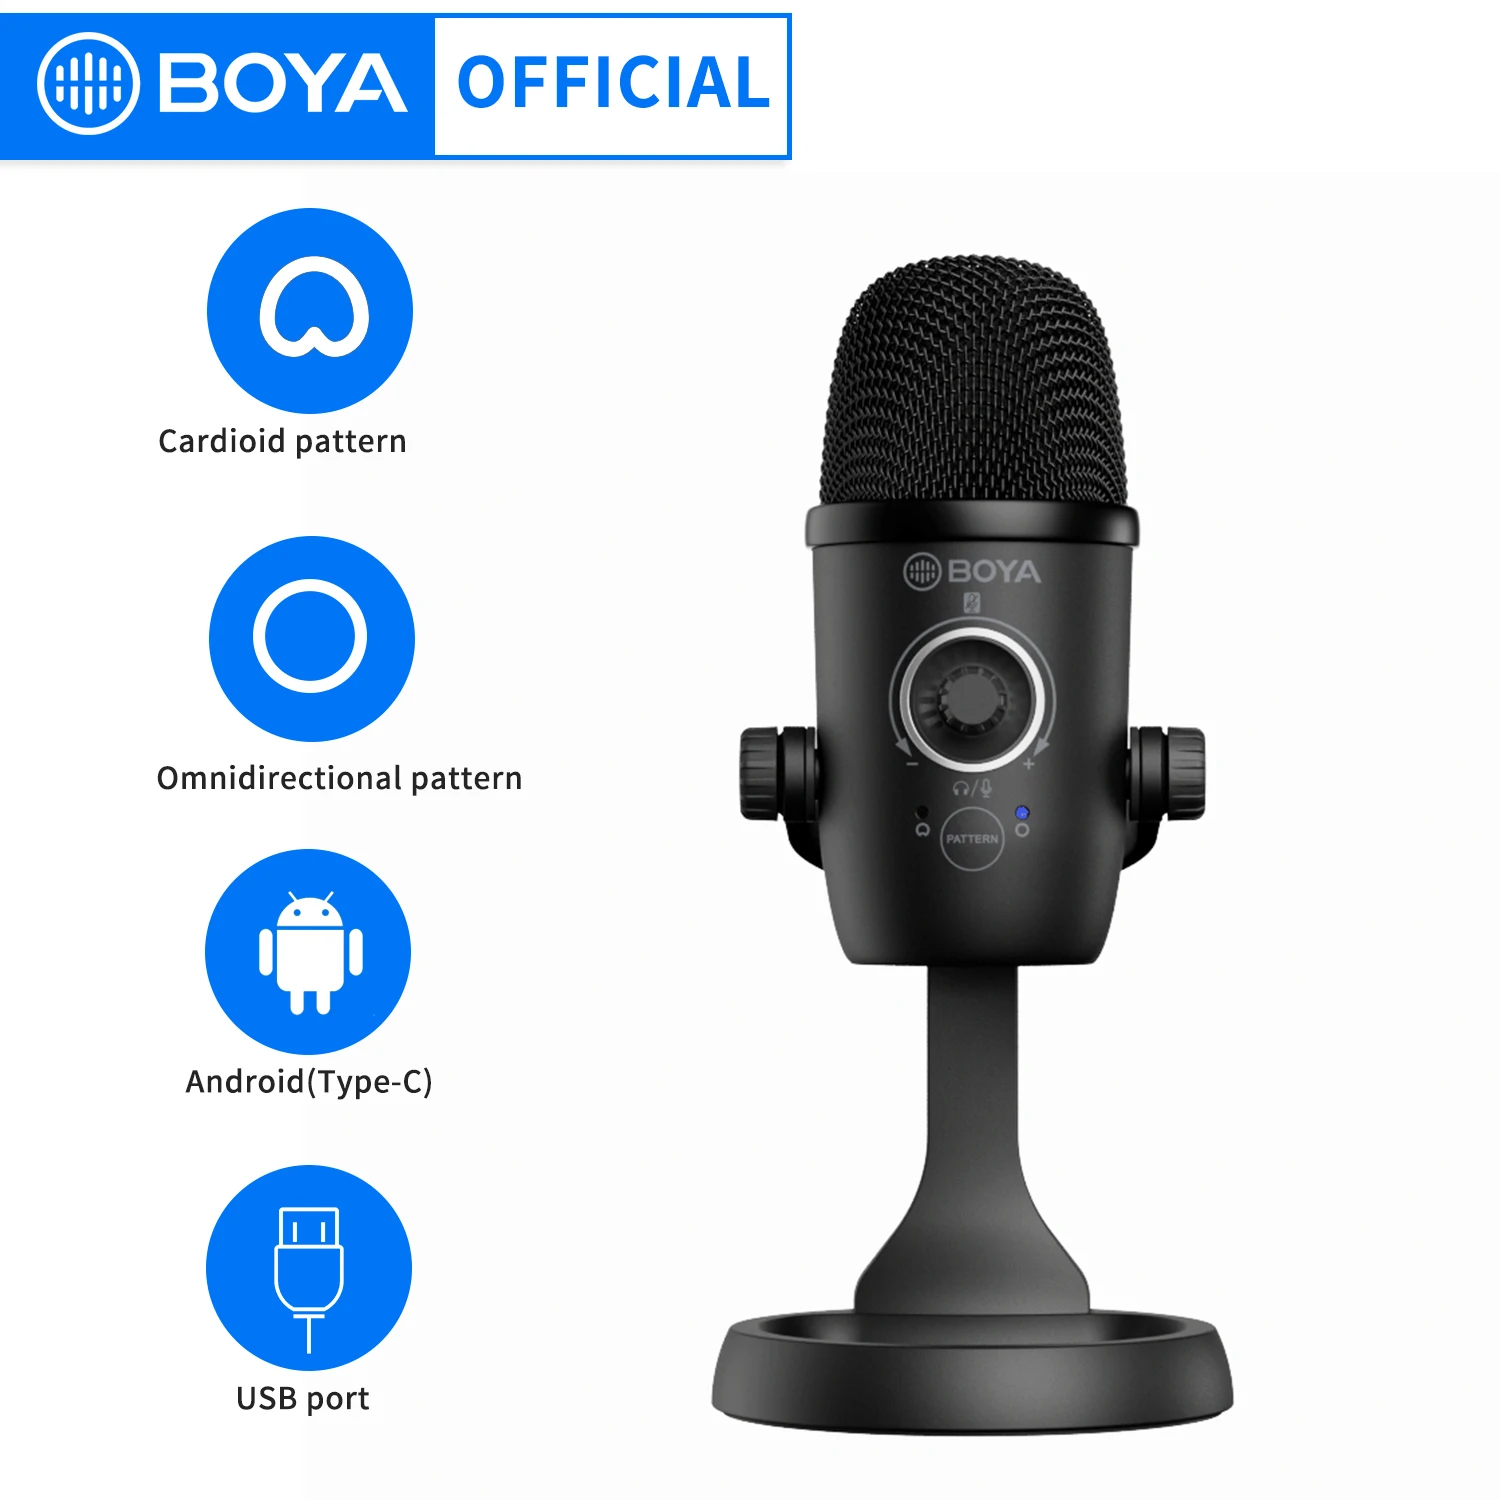 BOYA USB Condenser Recording Microphone BY-CM5 Tabletop Real-Time Studio Video Mic for PC iPhone Youtube Livestream Game Podcast